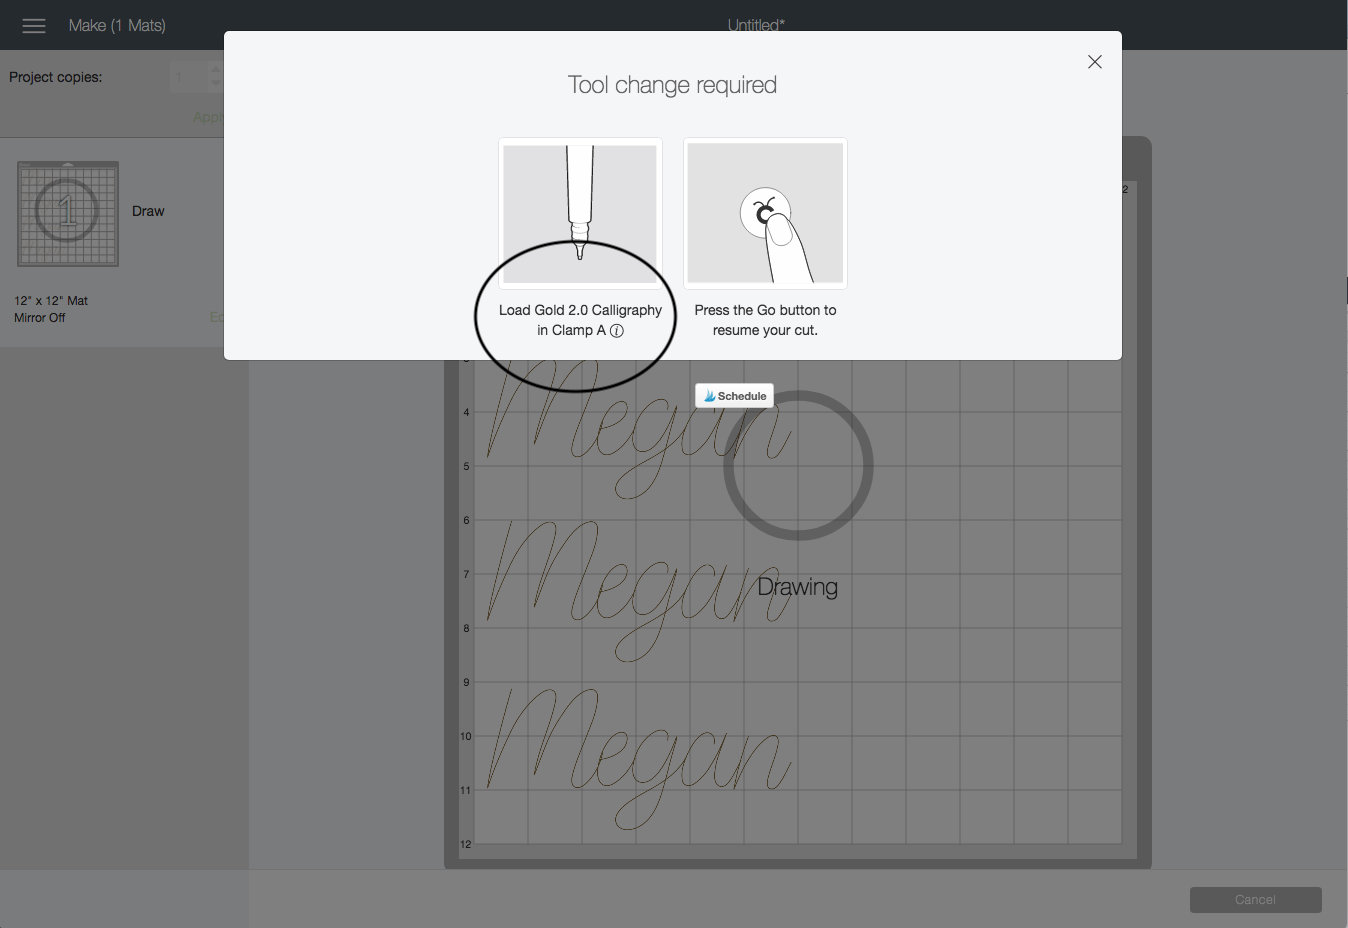 screenshot of the cricut design studio showing you how the cricut machine will prompt you to change a pen when it's time for a new color